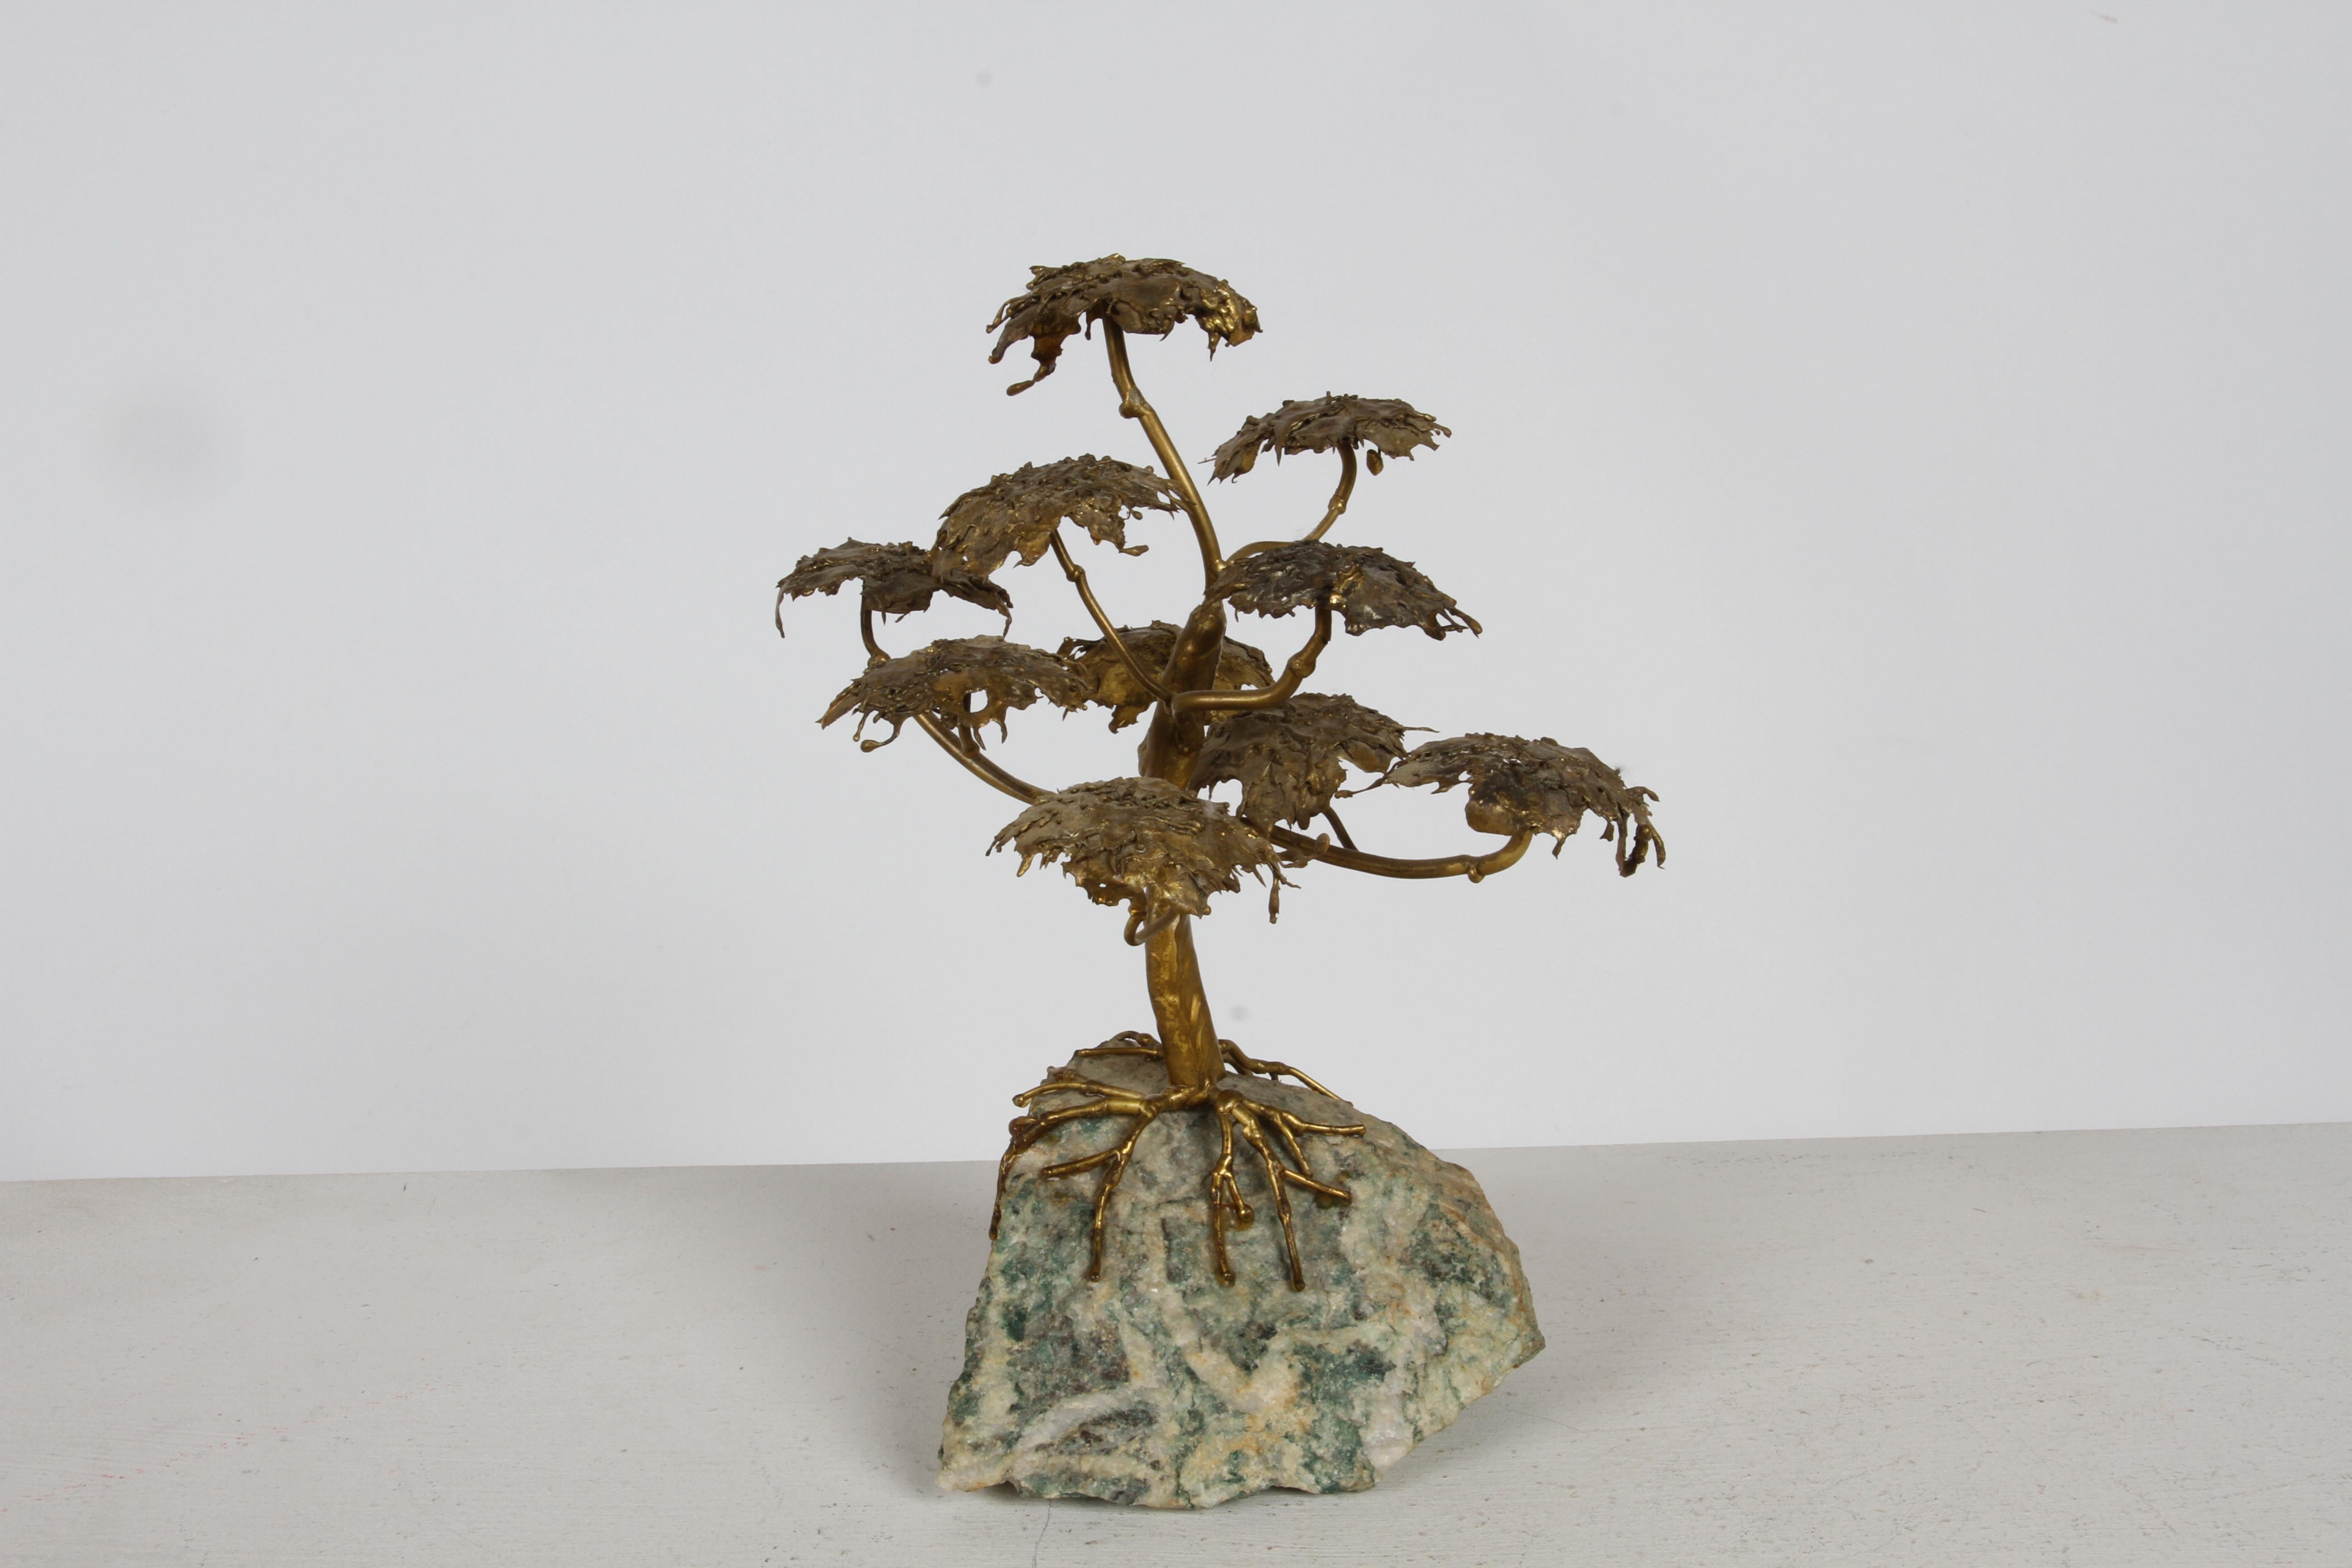 Beautiful handcrafted MCM Artisan made Brutalist Bonsai Tree on agate base table sculpture. In the organic modern style, fabricated of brazed metal with a bronze gold metal tone finish. The Agate base is Tree Agate, see below its meaning. Unsigned.